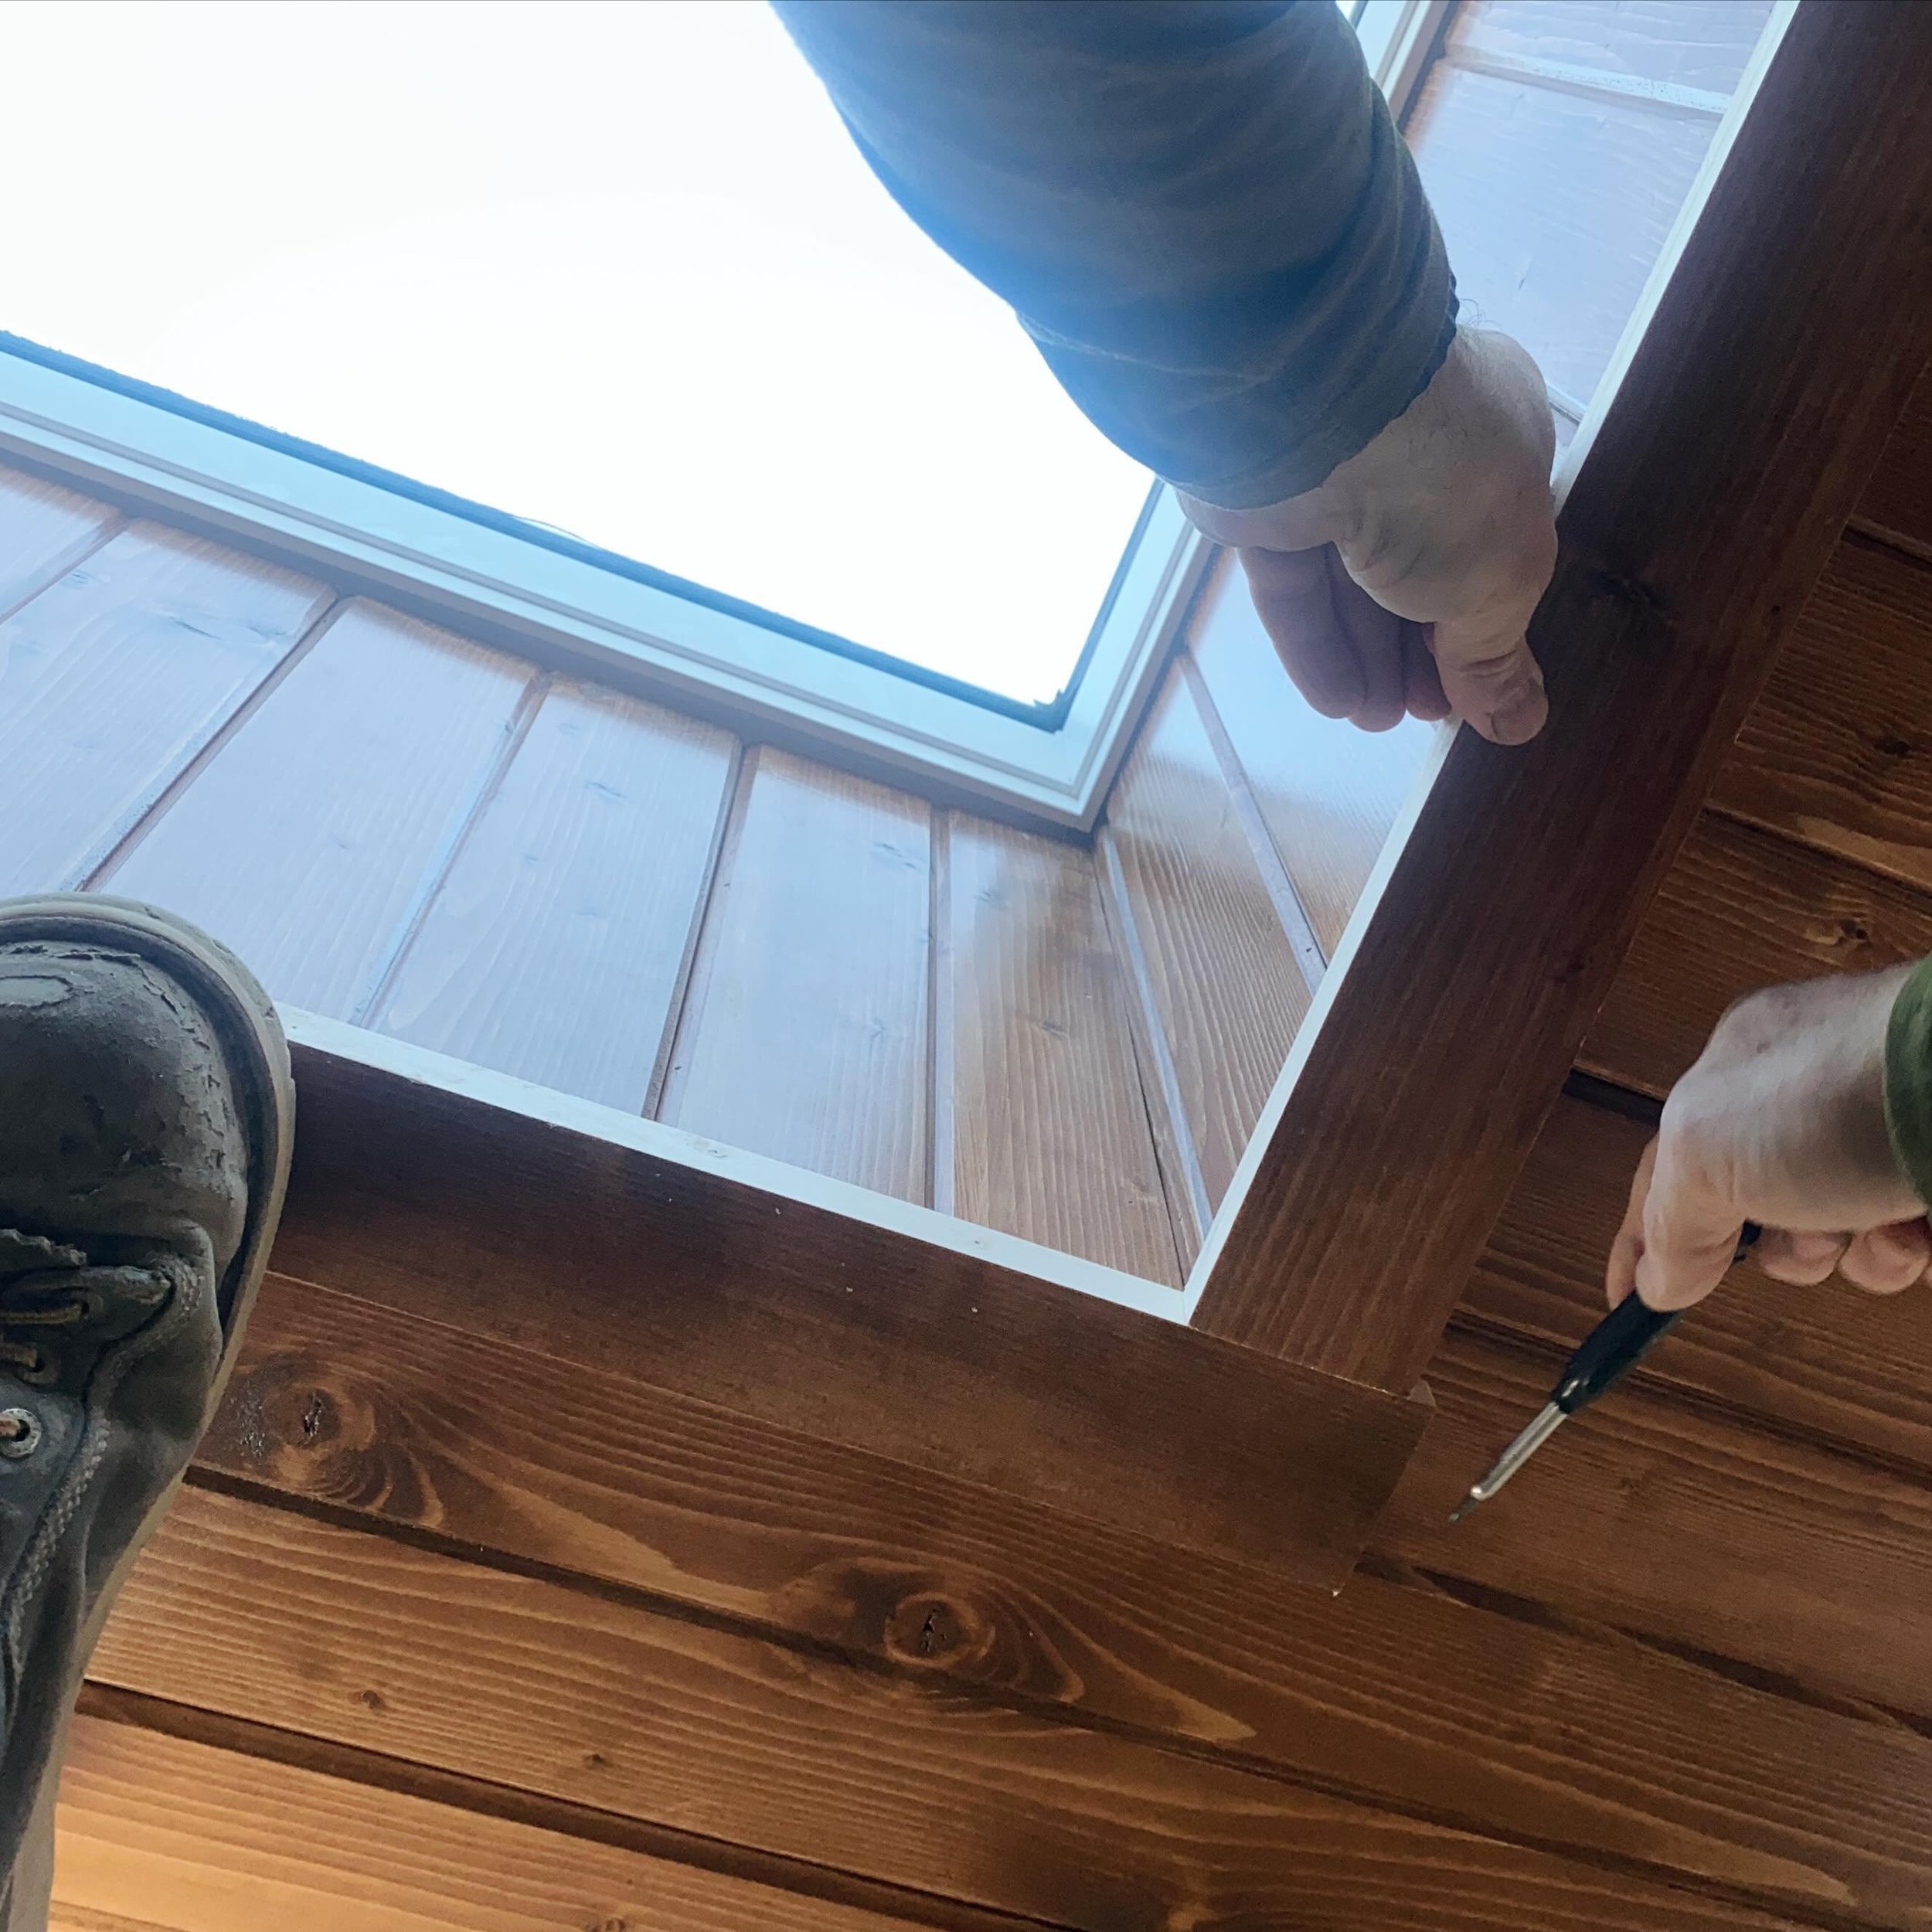 Many days, I could use three hands&hellip;sometimes four. 
#dannerboots 
#myleftfoot 
#forthewin 
#iusemyhead 
#alsotooaswell 
#btw 
@dannerboots my foreman have bald spots. 
#buildwithwood 
#cladwithwood 
#woodisgood